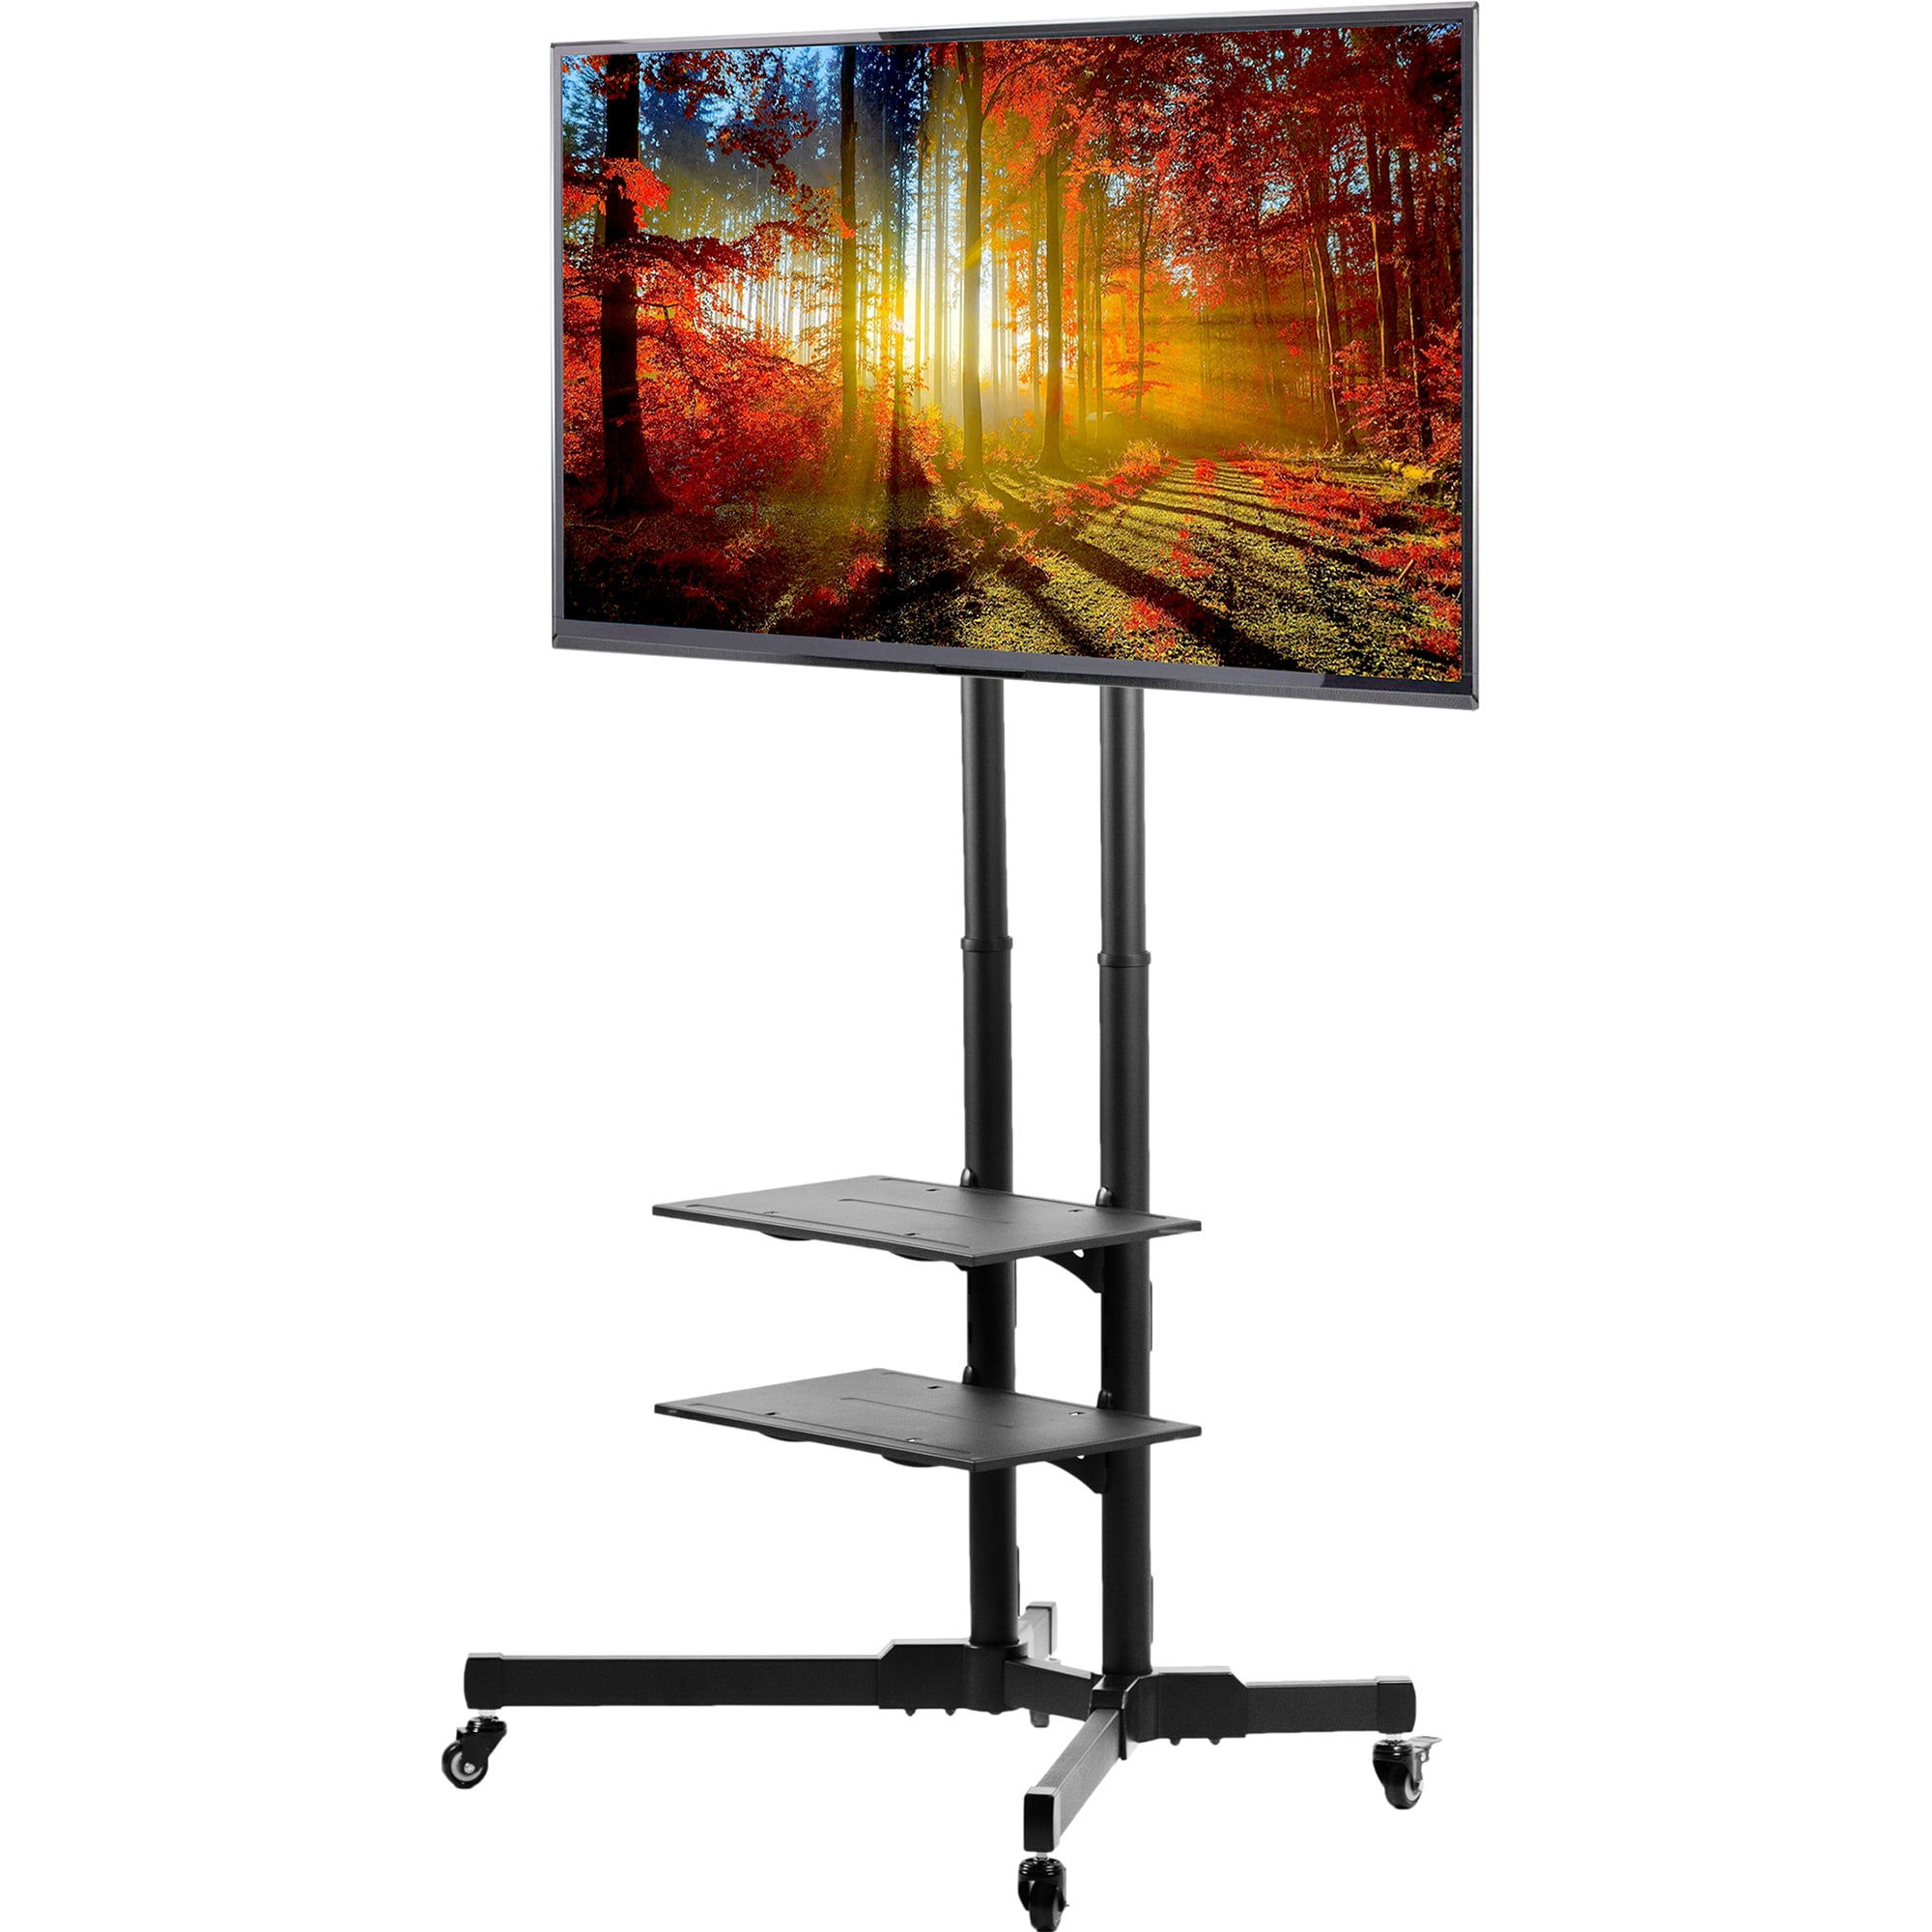 Mobile TV Stand with Locking Wheels/Tilt Mount for Most 32-65 Inch LCD LED TVs 